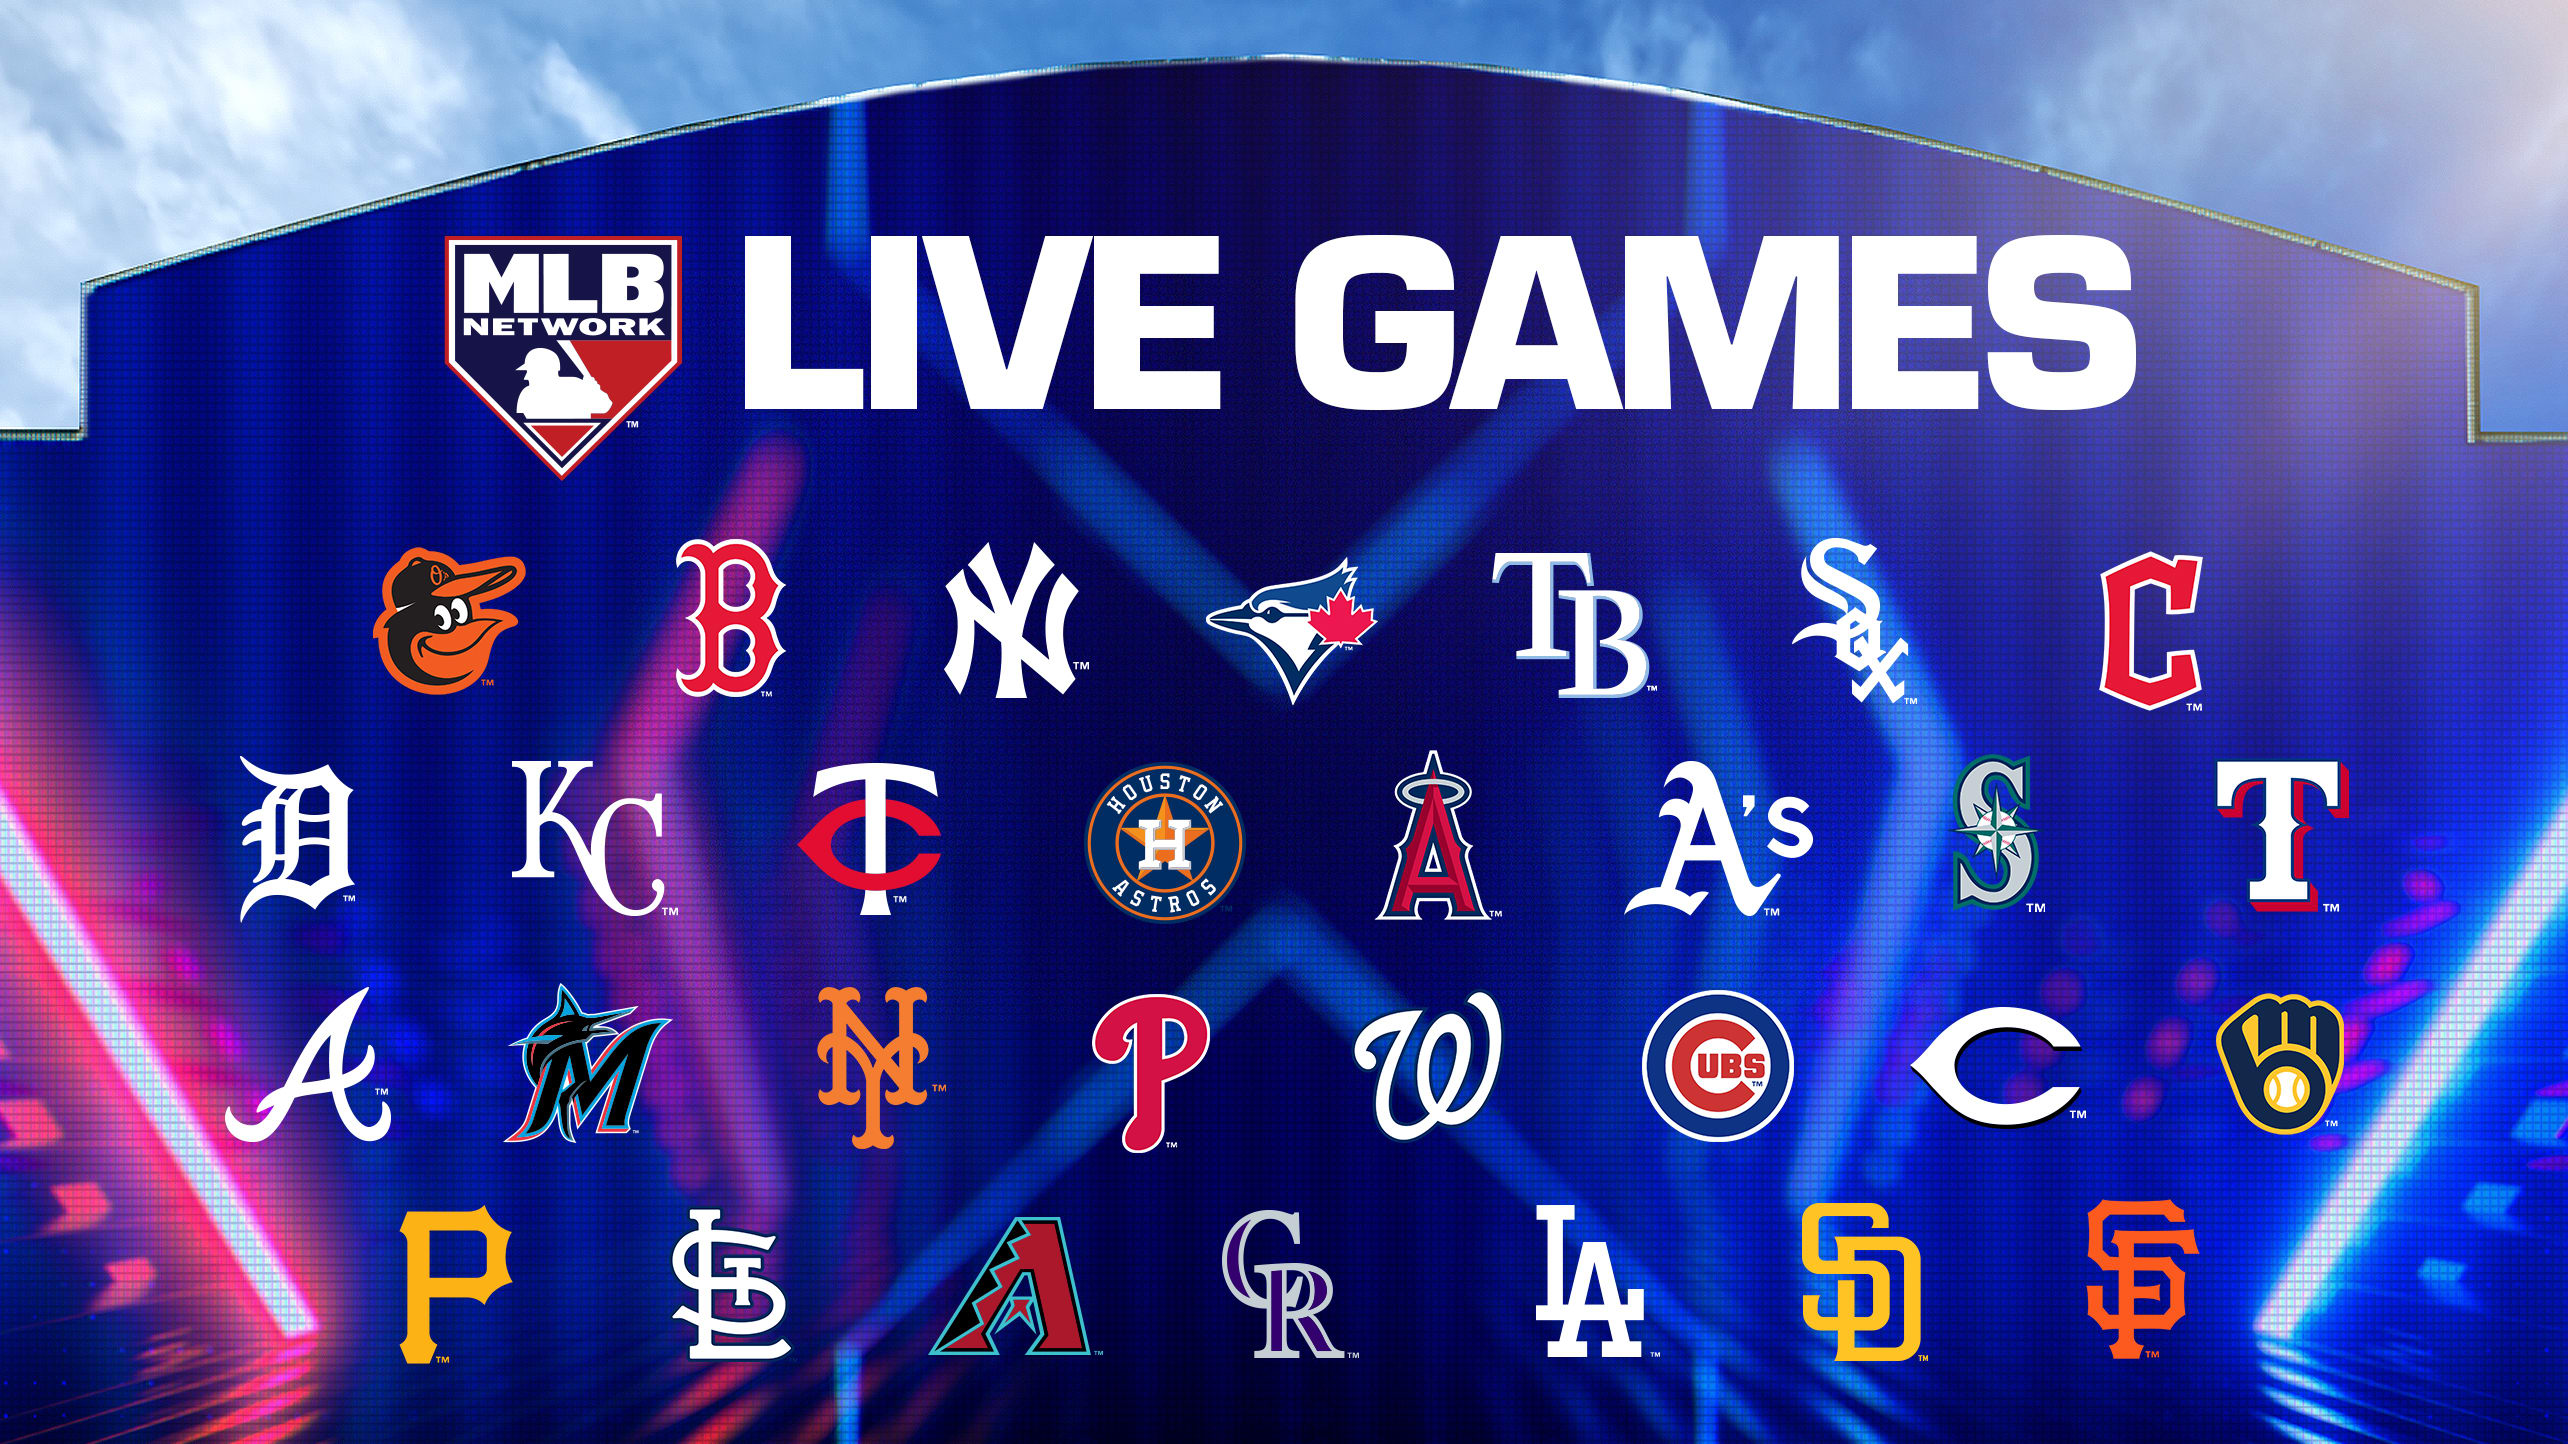 Live games on MLB Network